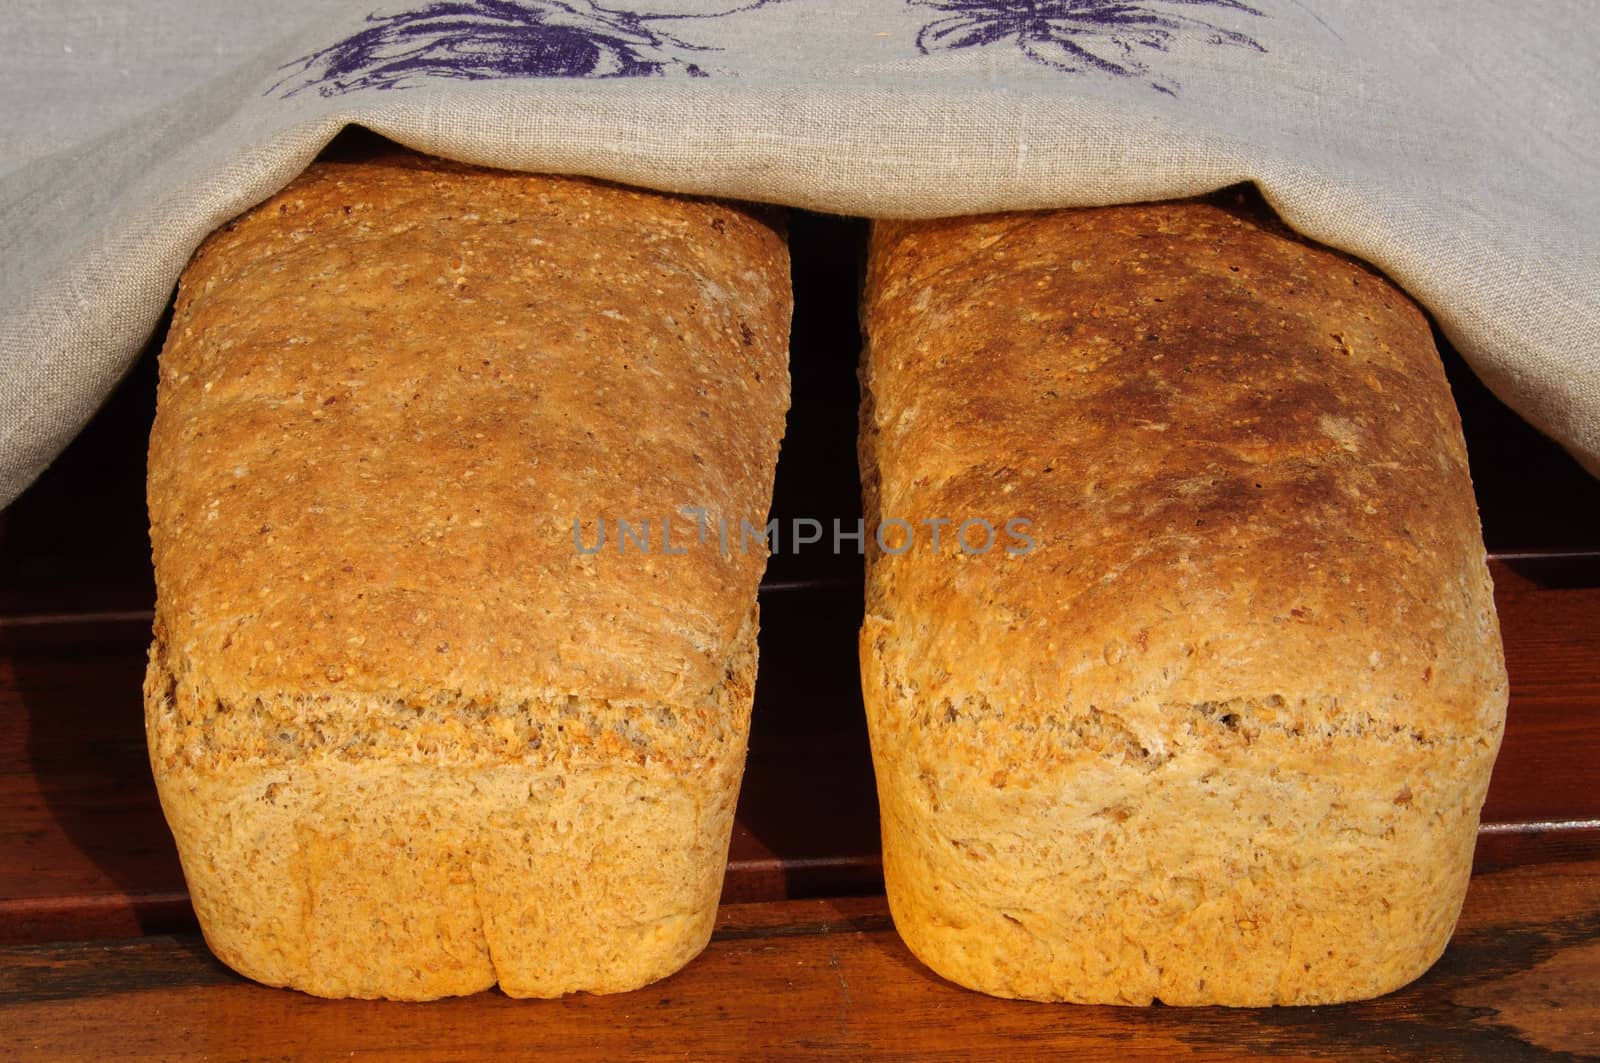 Homemade bread by GryT